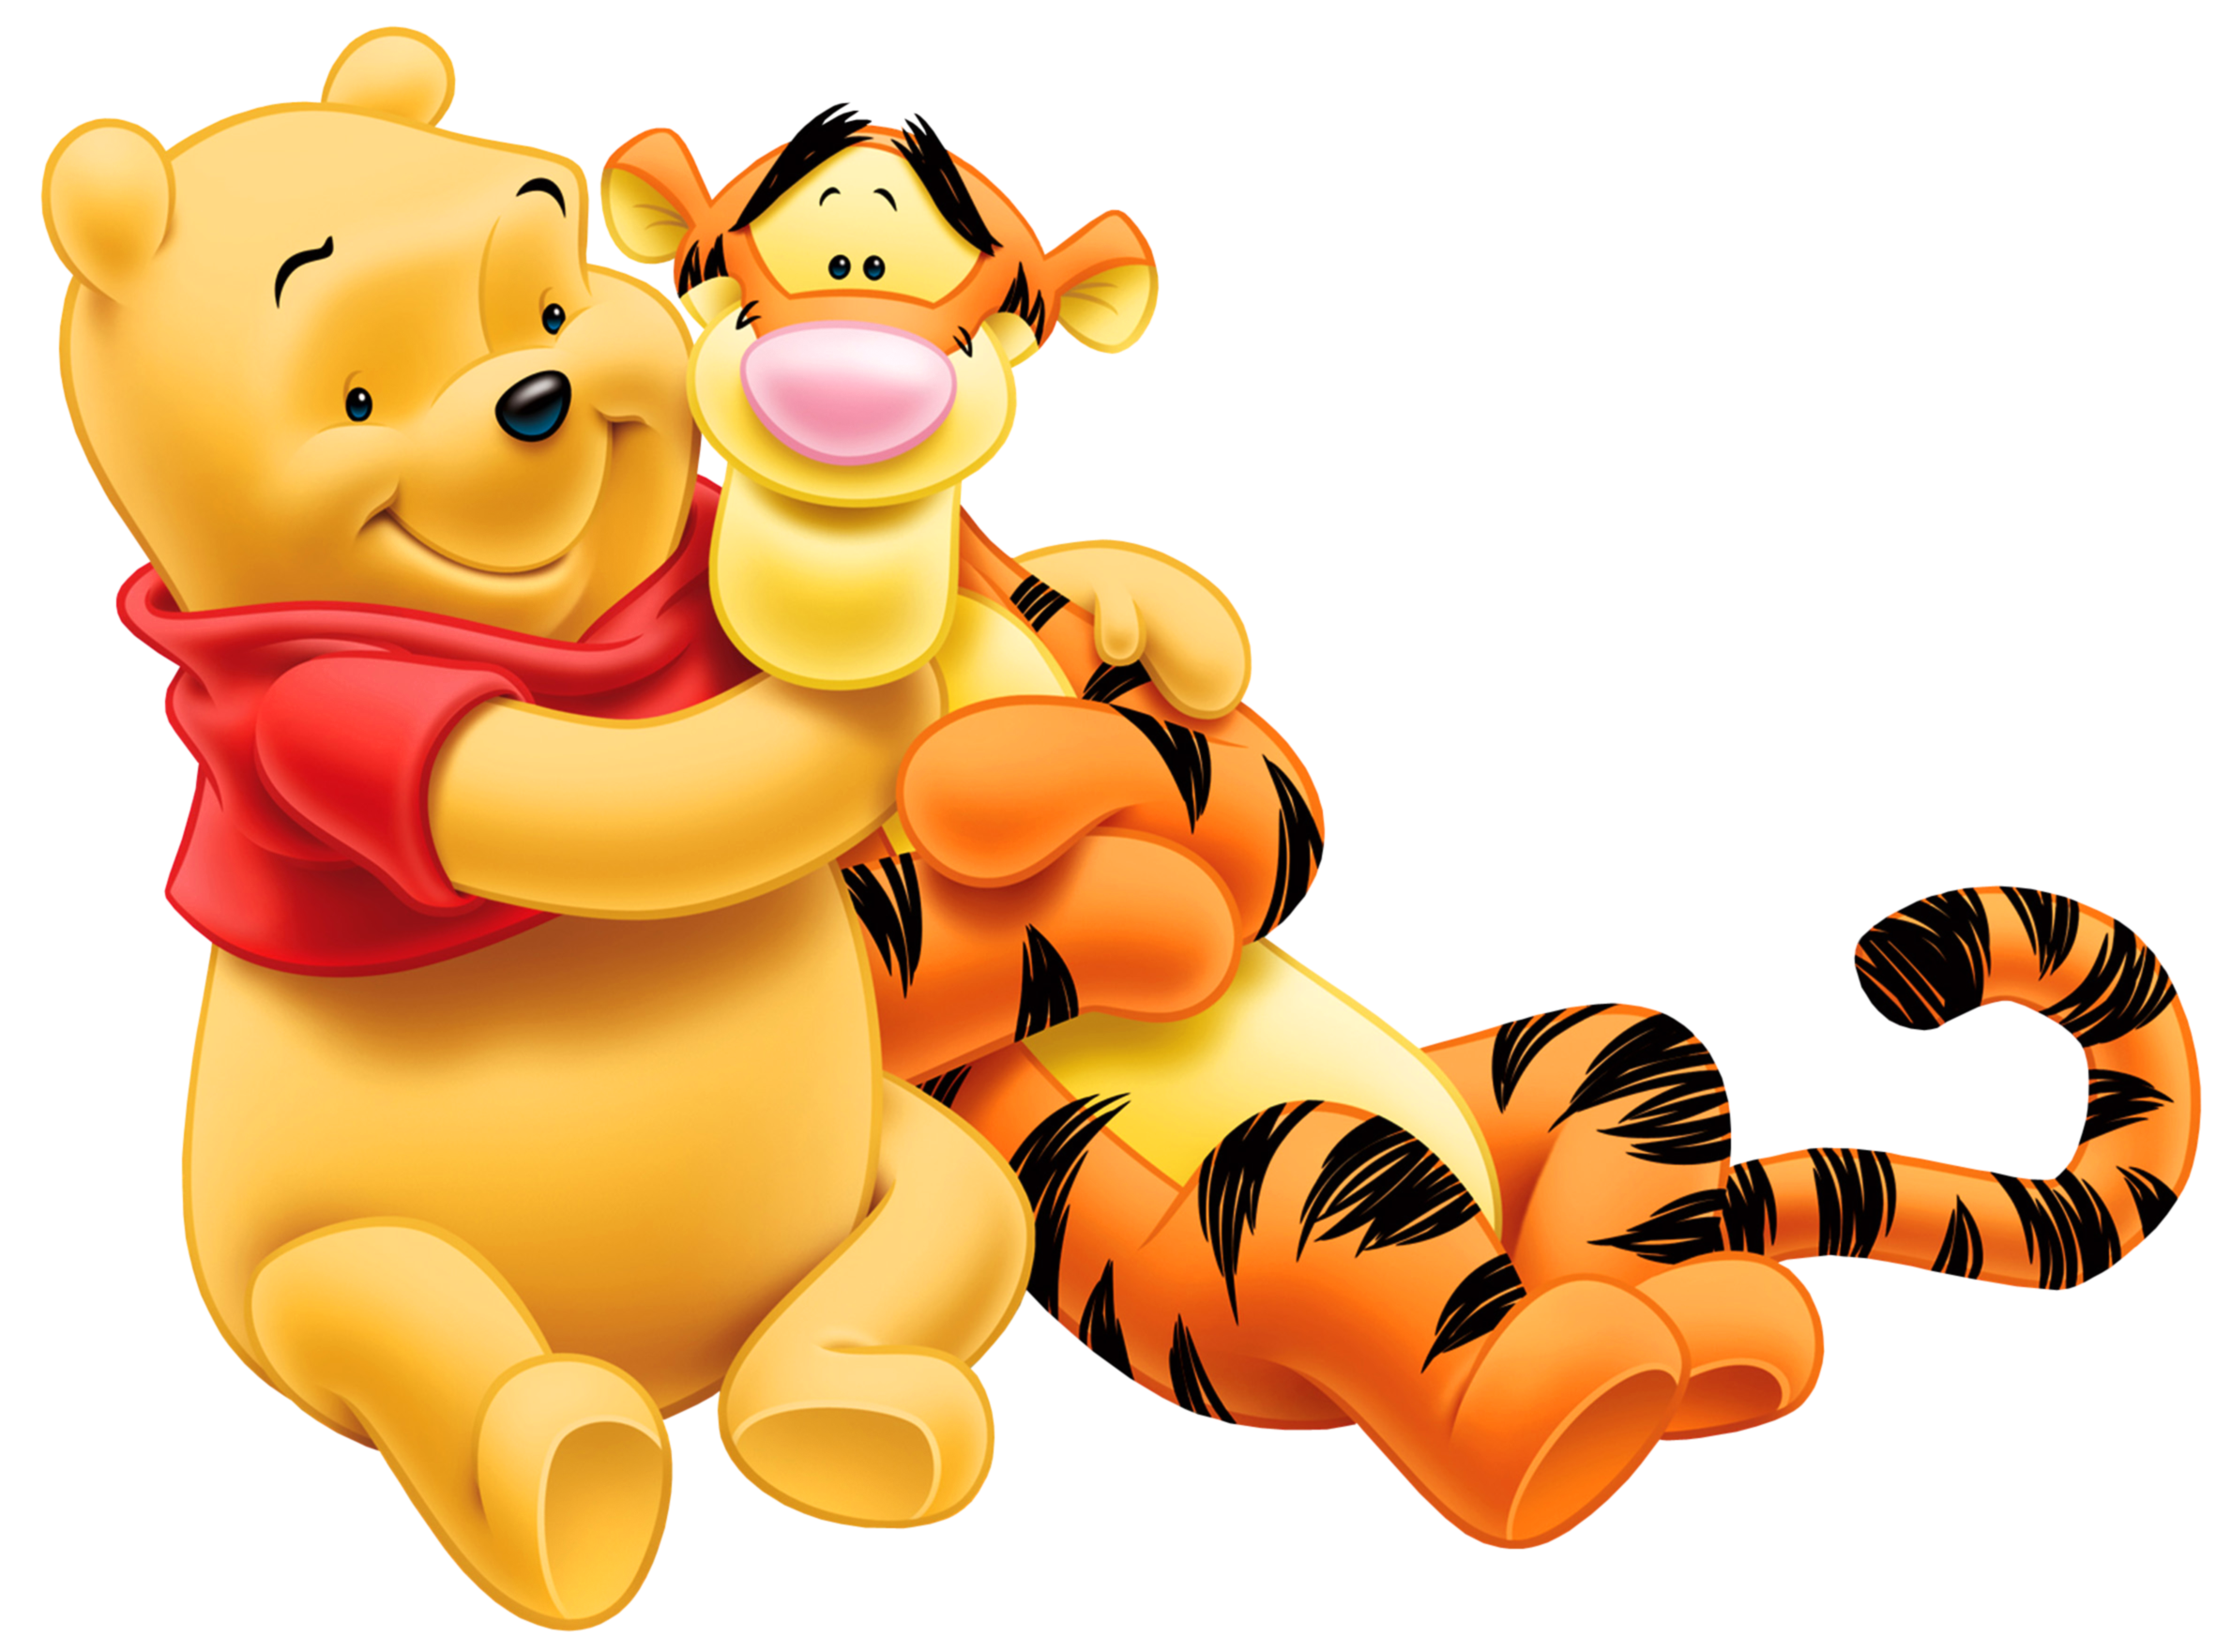 Transparent Tigger and Winnie the Pooh PNG Cartoon​ | Gallery Yopriceville  - High-Quality Free Images and Transparent PNG Clipart